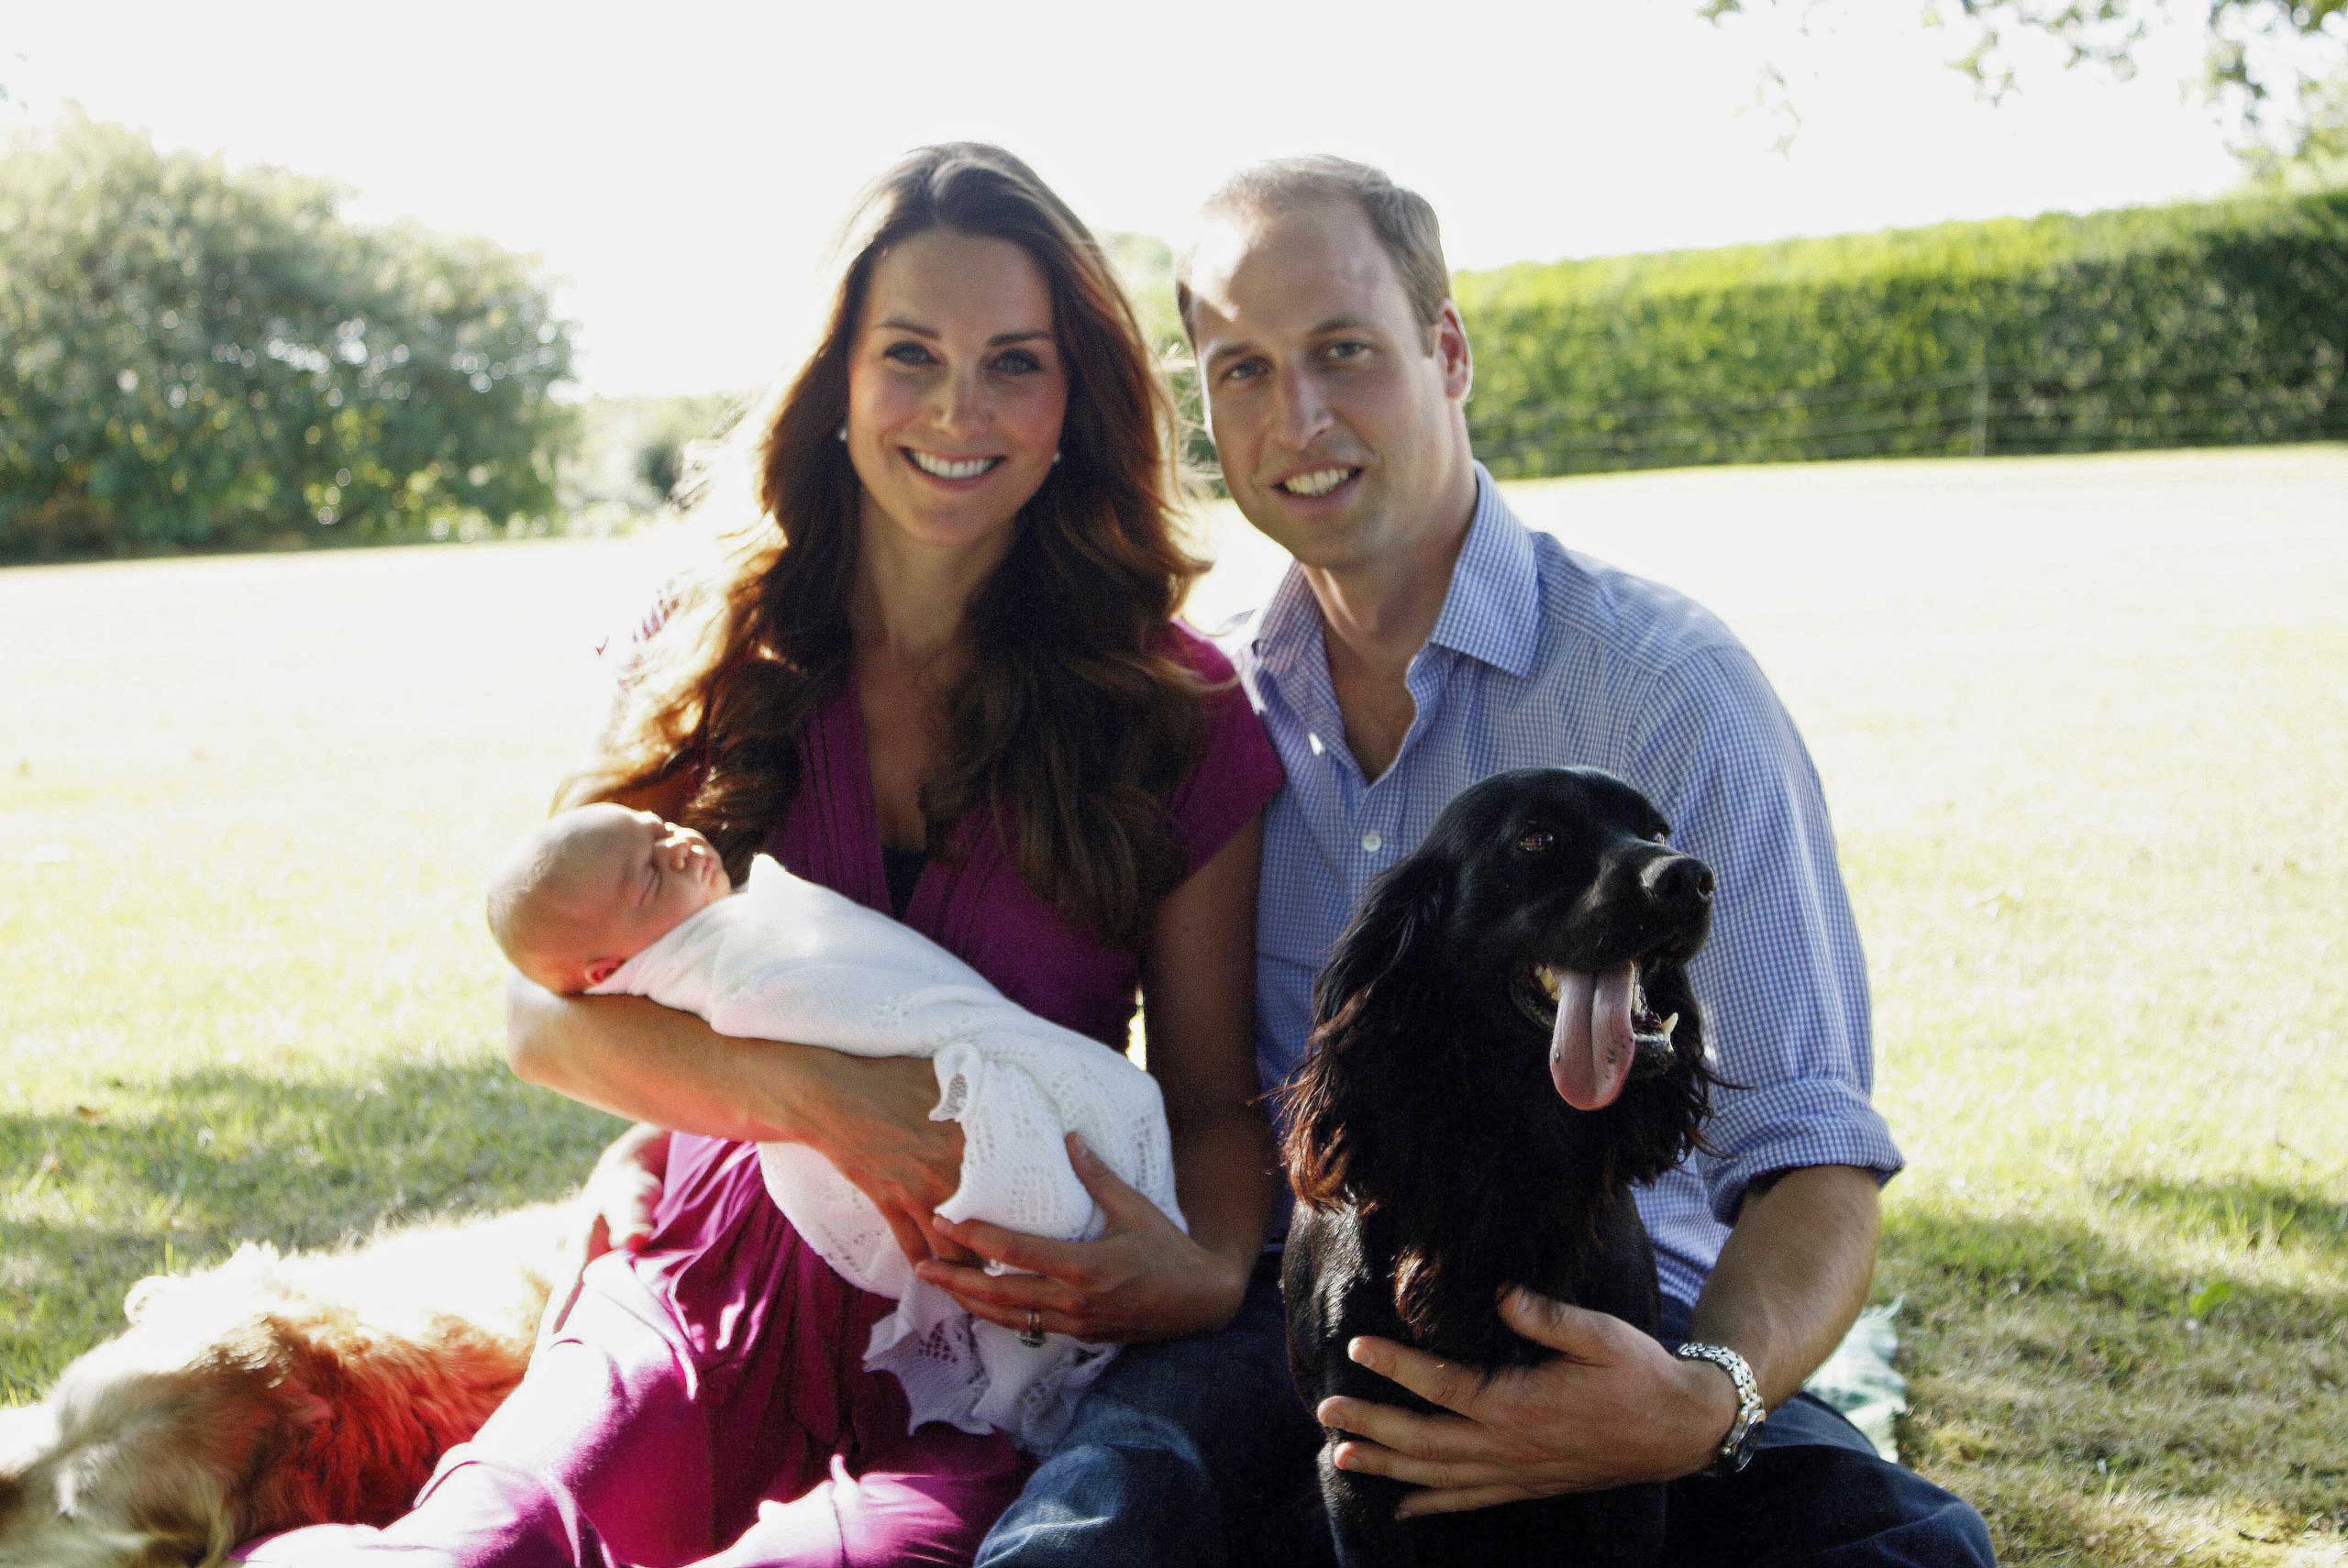 Prince William, Duke of Cambridge, his wife Catherine, Duchess of Cambridge, with their newborn baby boy, Prince George of Cambridge, Tilly the retriever, left, a Middleton family pet and Lupo, the couple's cocker spaniel, right, at the Middleton family home in Bucklebury, Berkshire, in early August, 2013.